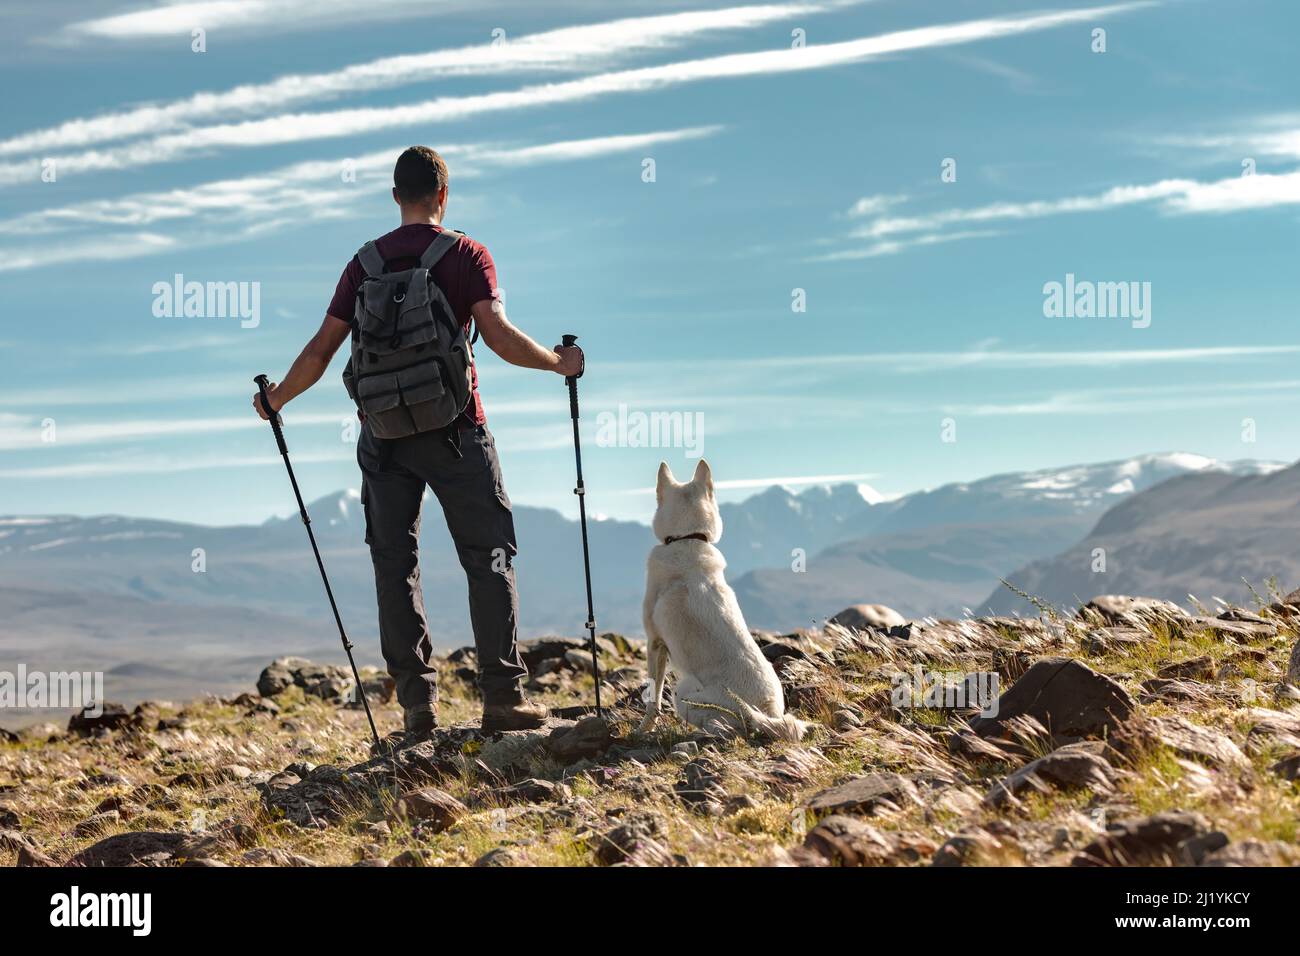 Hiker with hiking poles and white husky dog stands against the backdrop of mountains Stock Photo